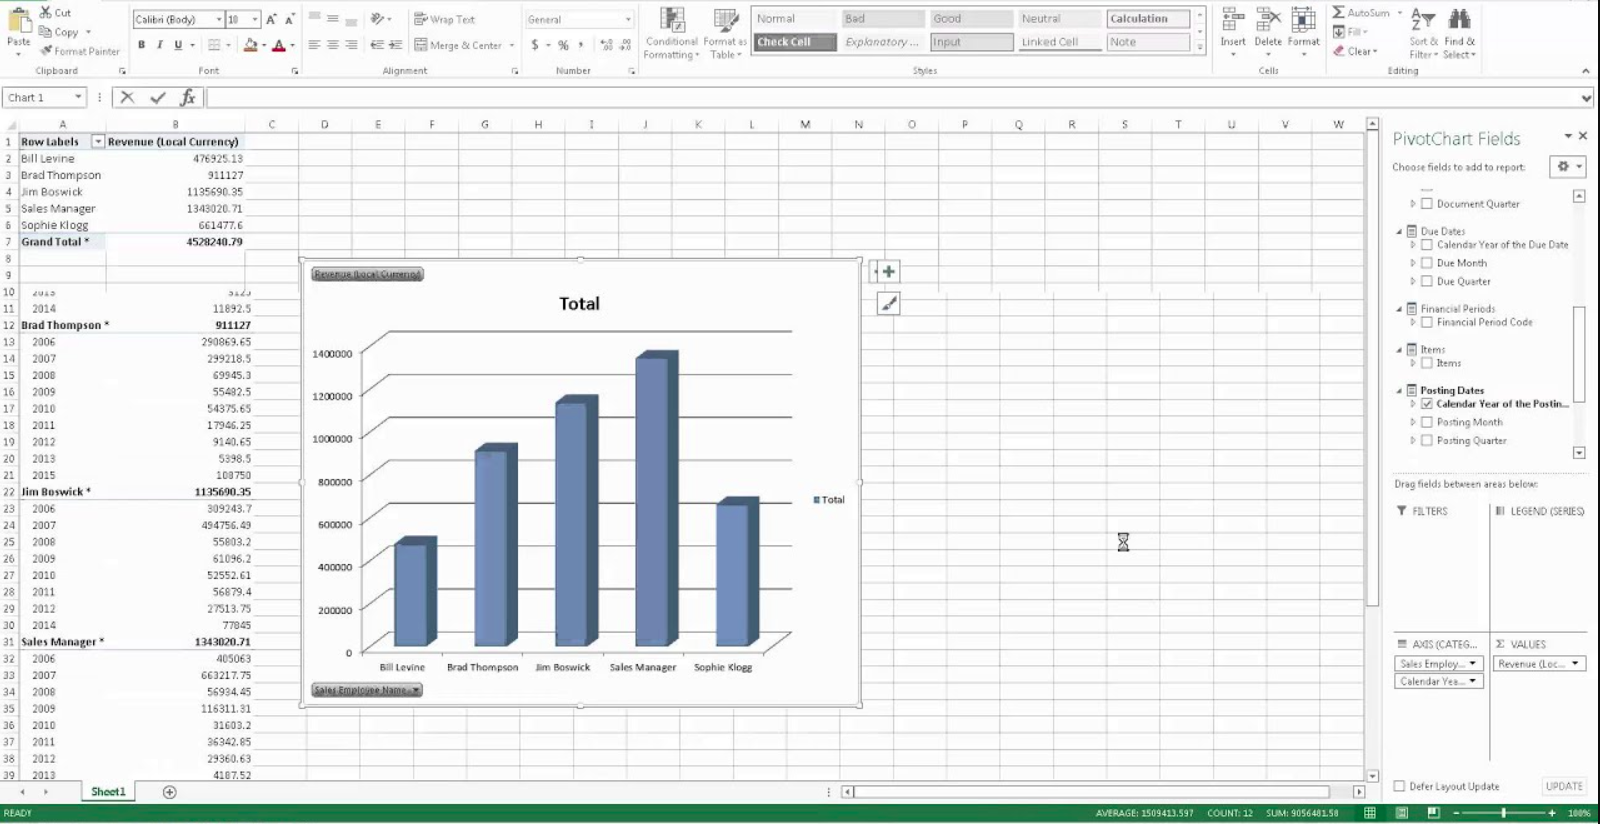 Excel-based Interactive Analysis